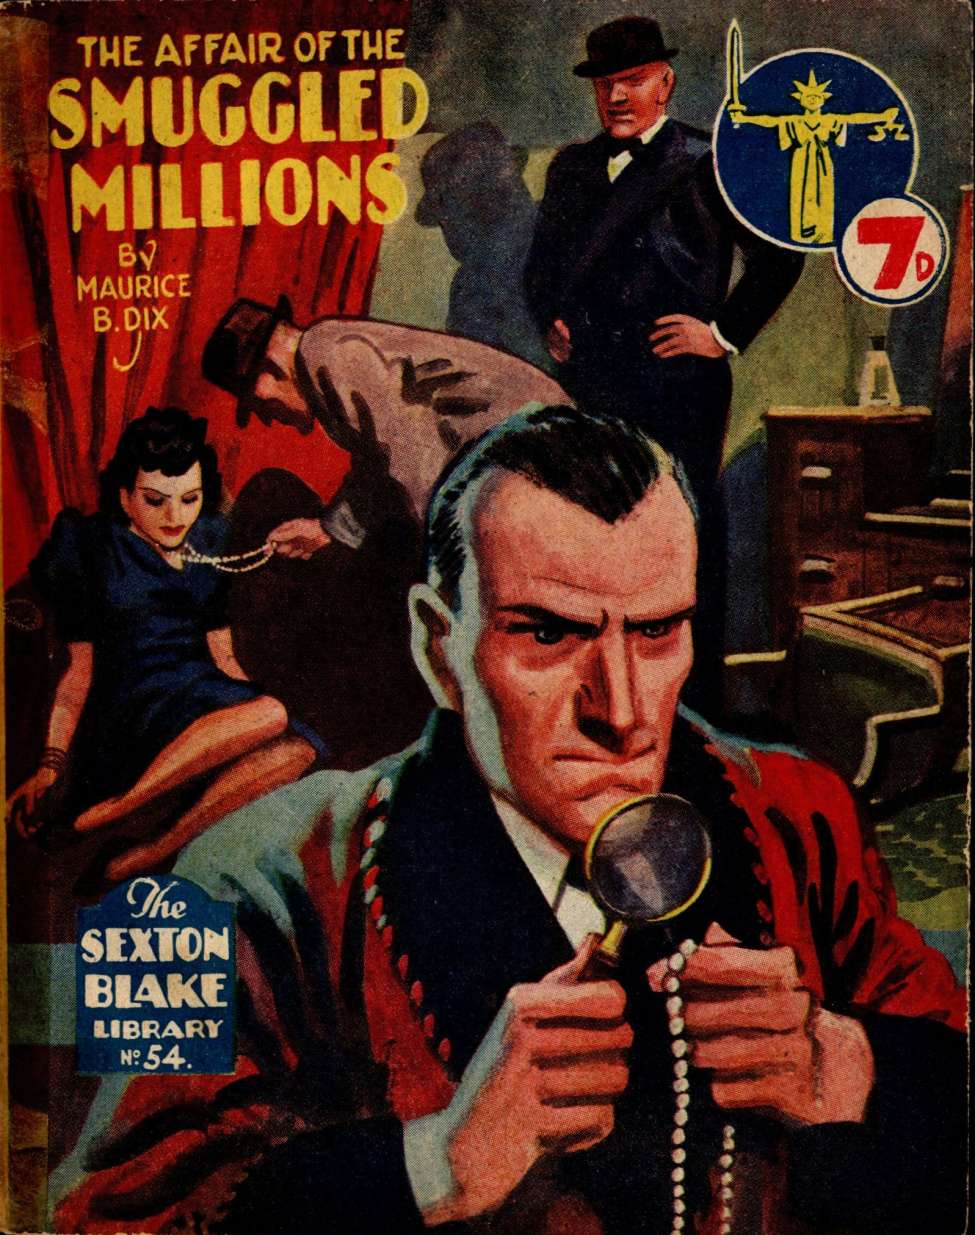 Book Cover For Sexton Blake Library S3 54 - The Affair of the Smuggled Millions